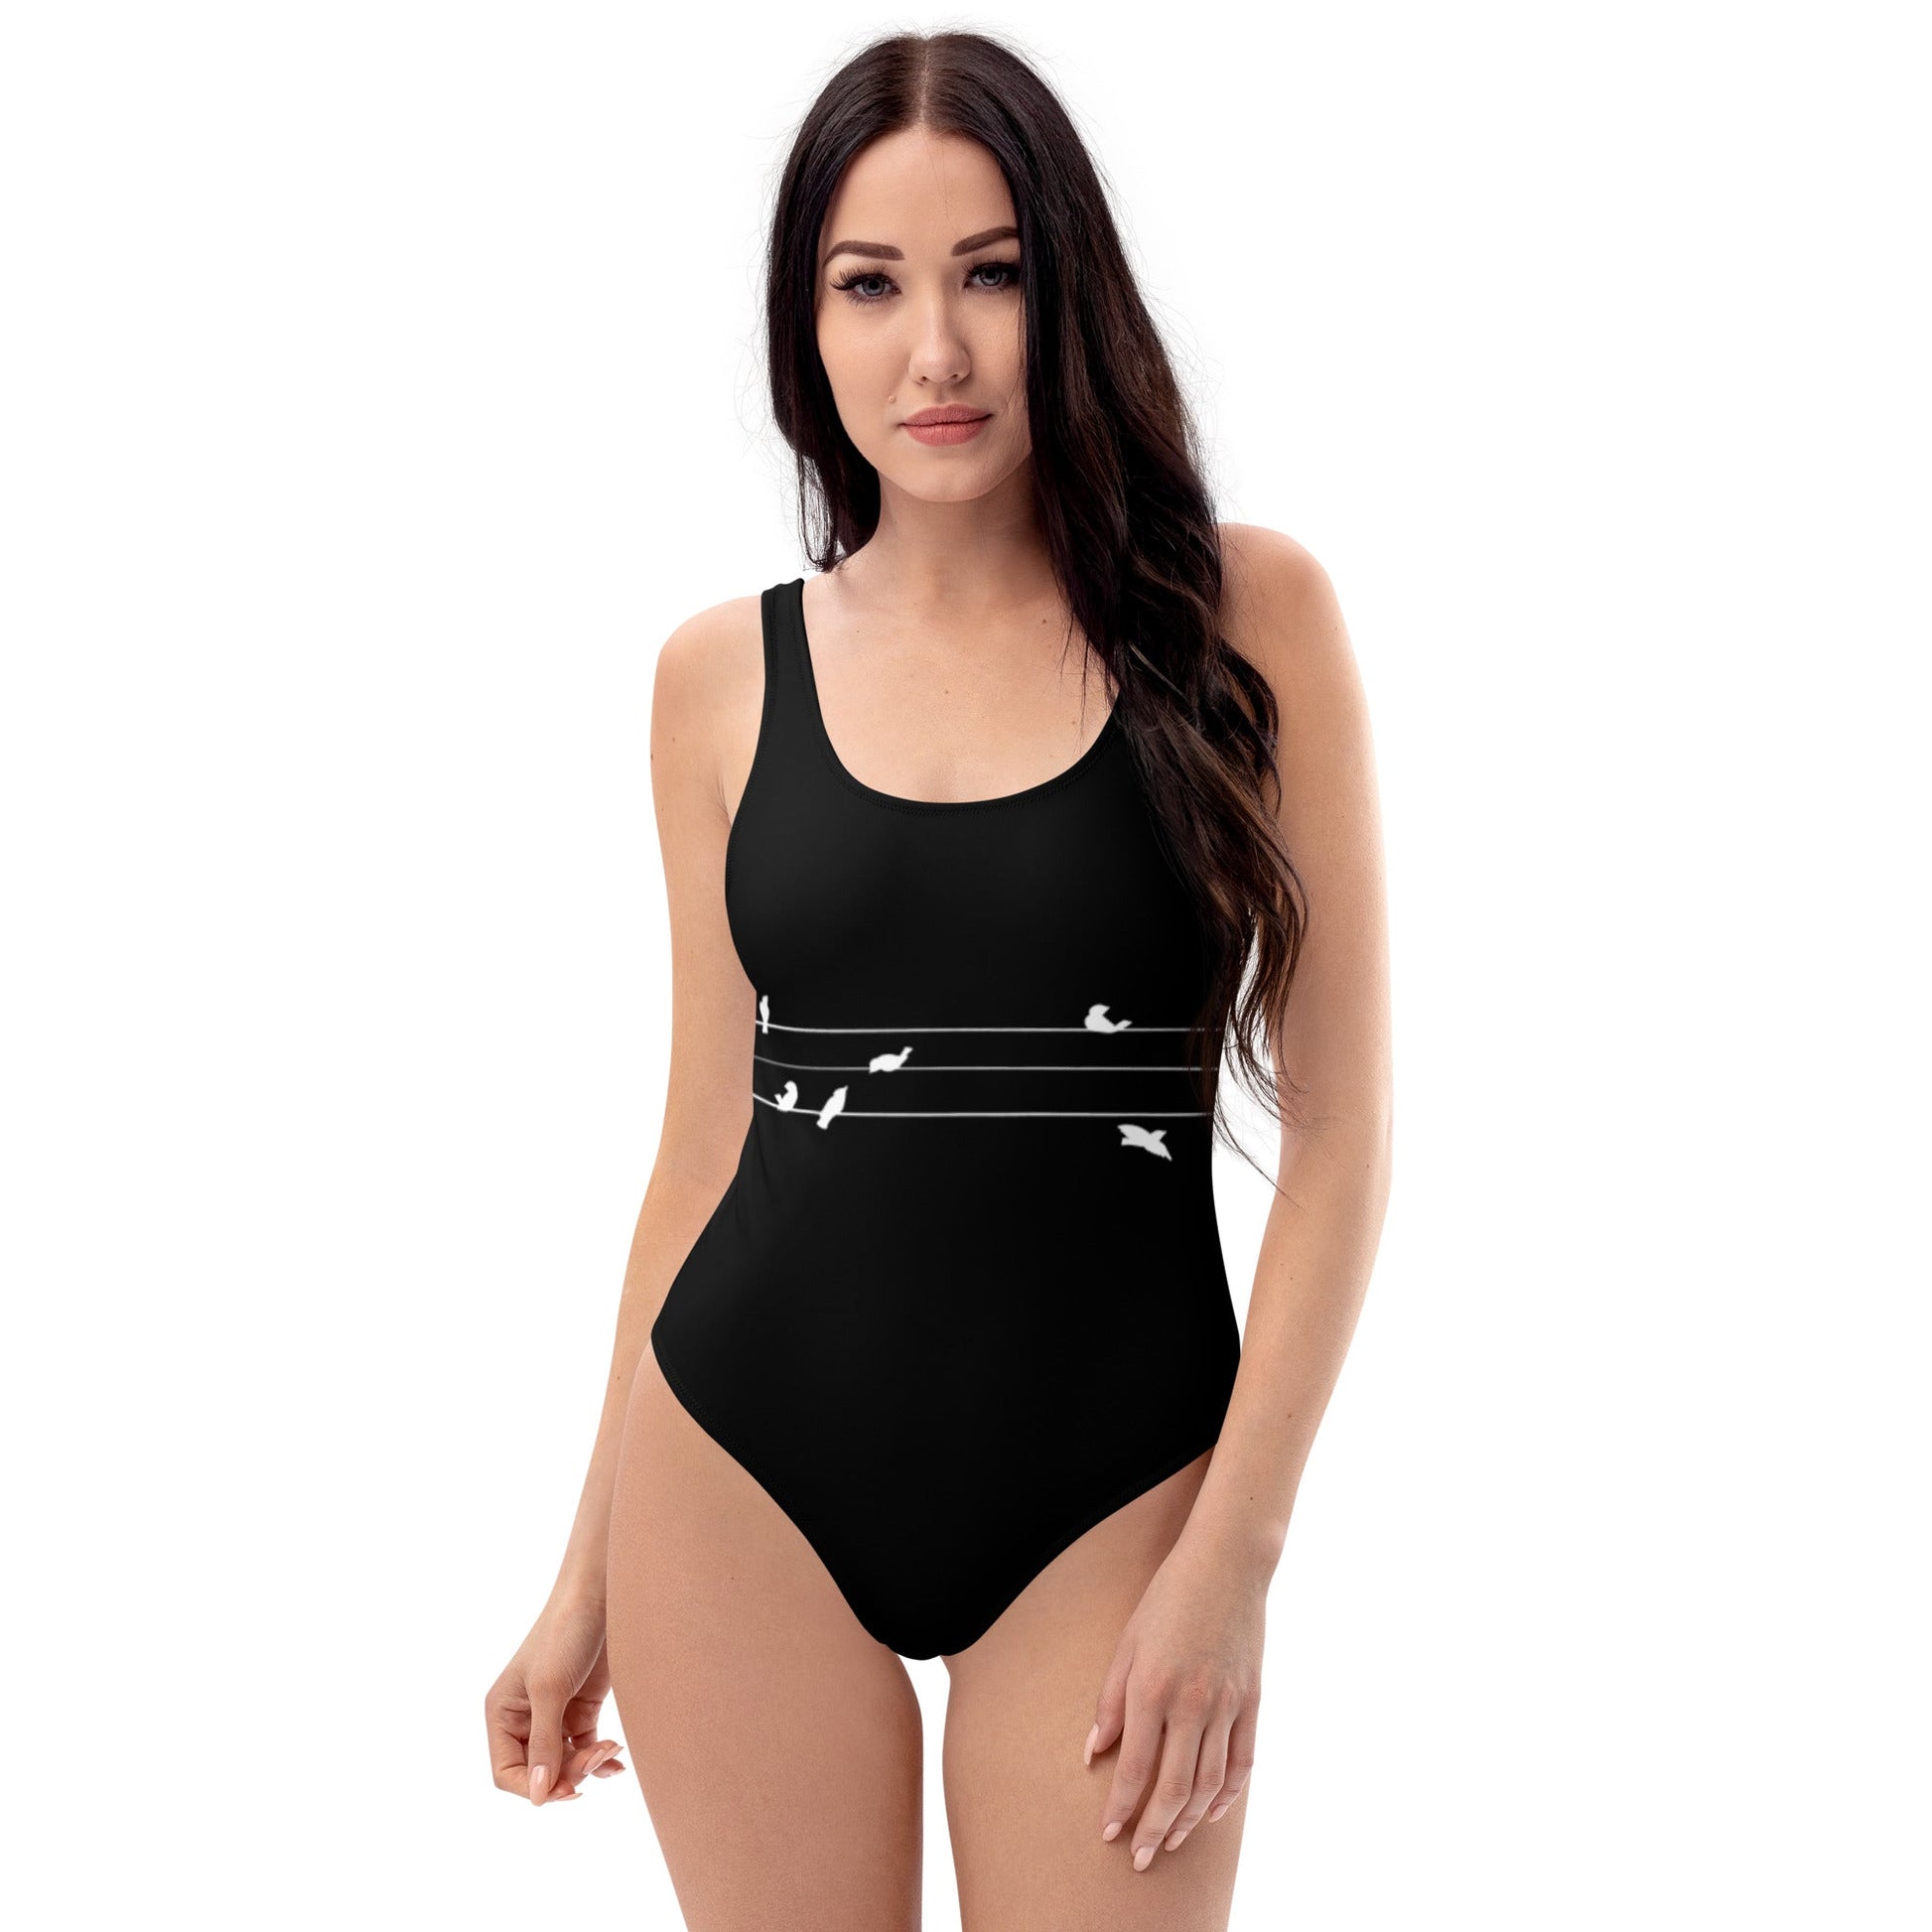 womens-black-swimsuit-fly-on-the-wall-black